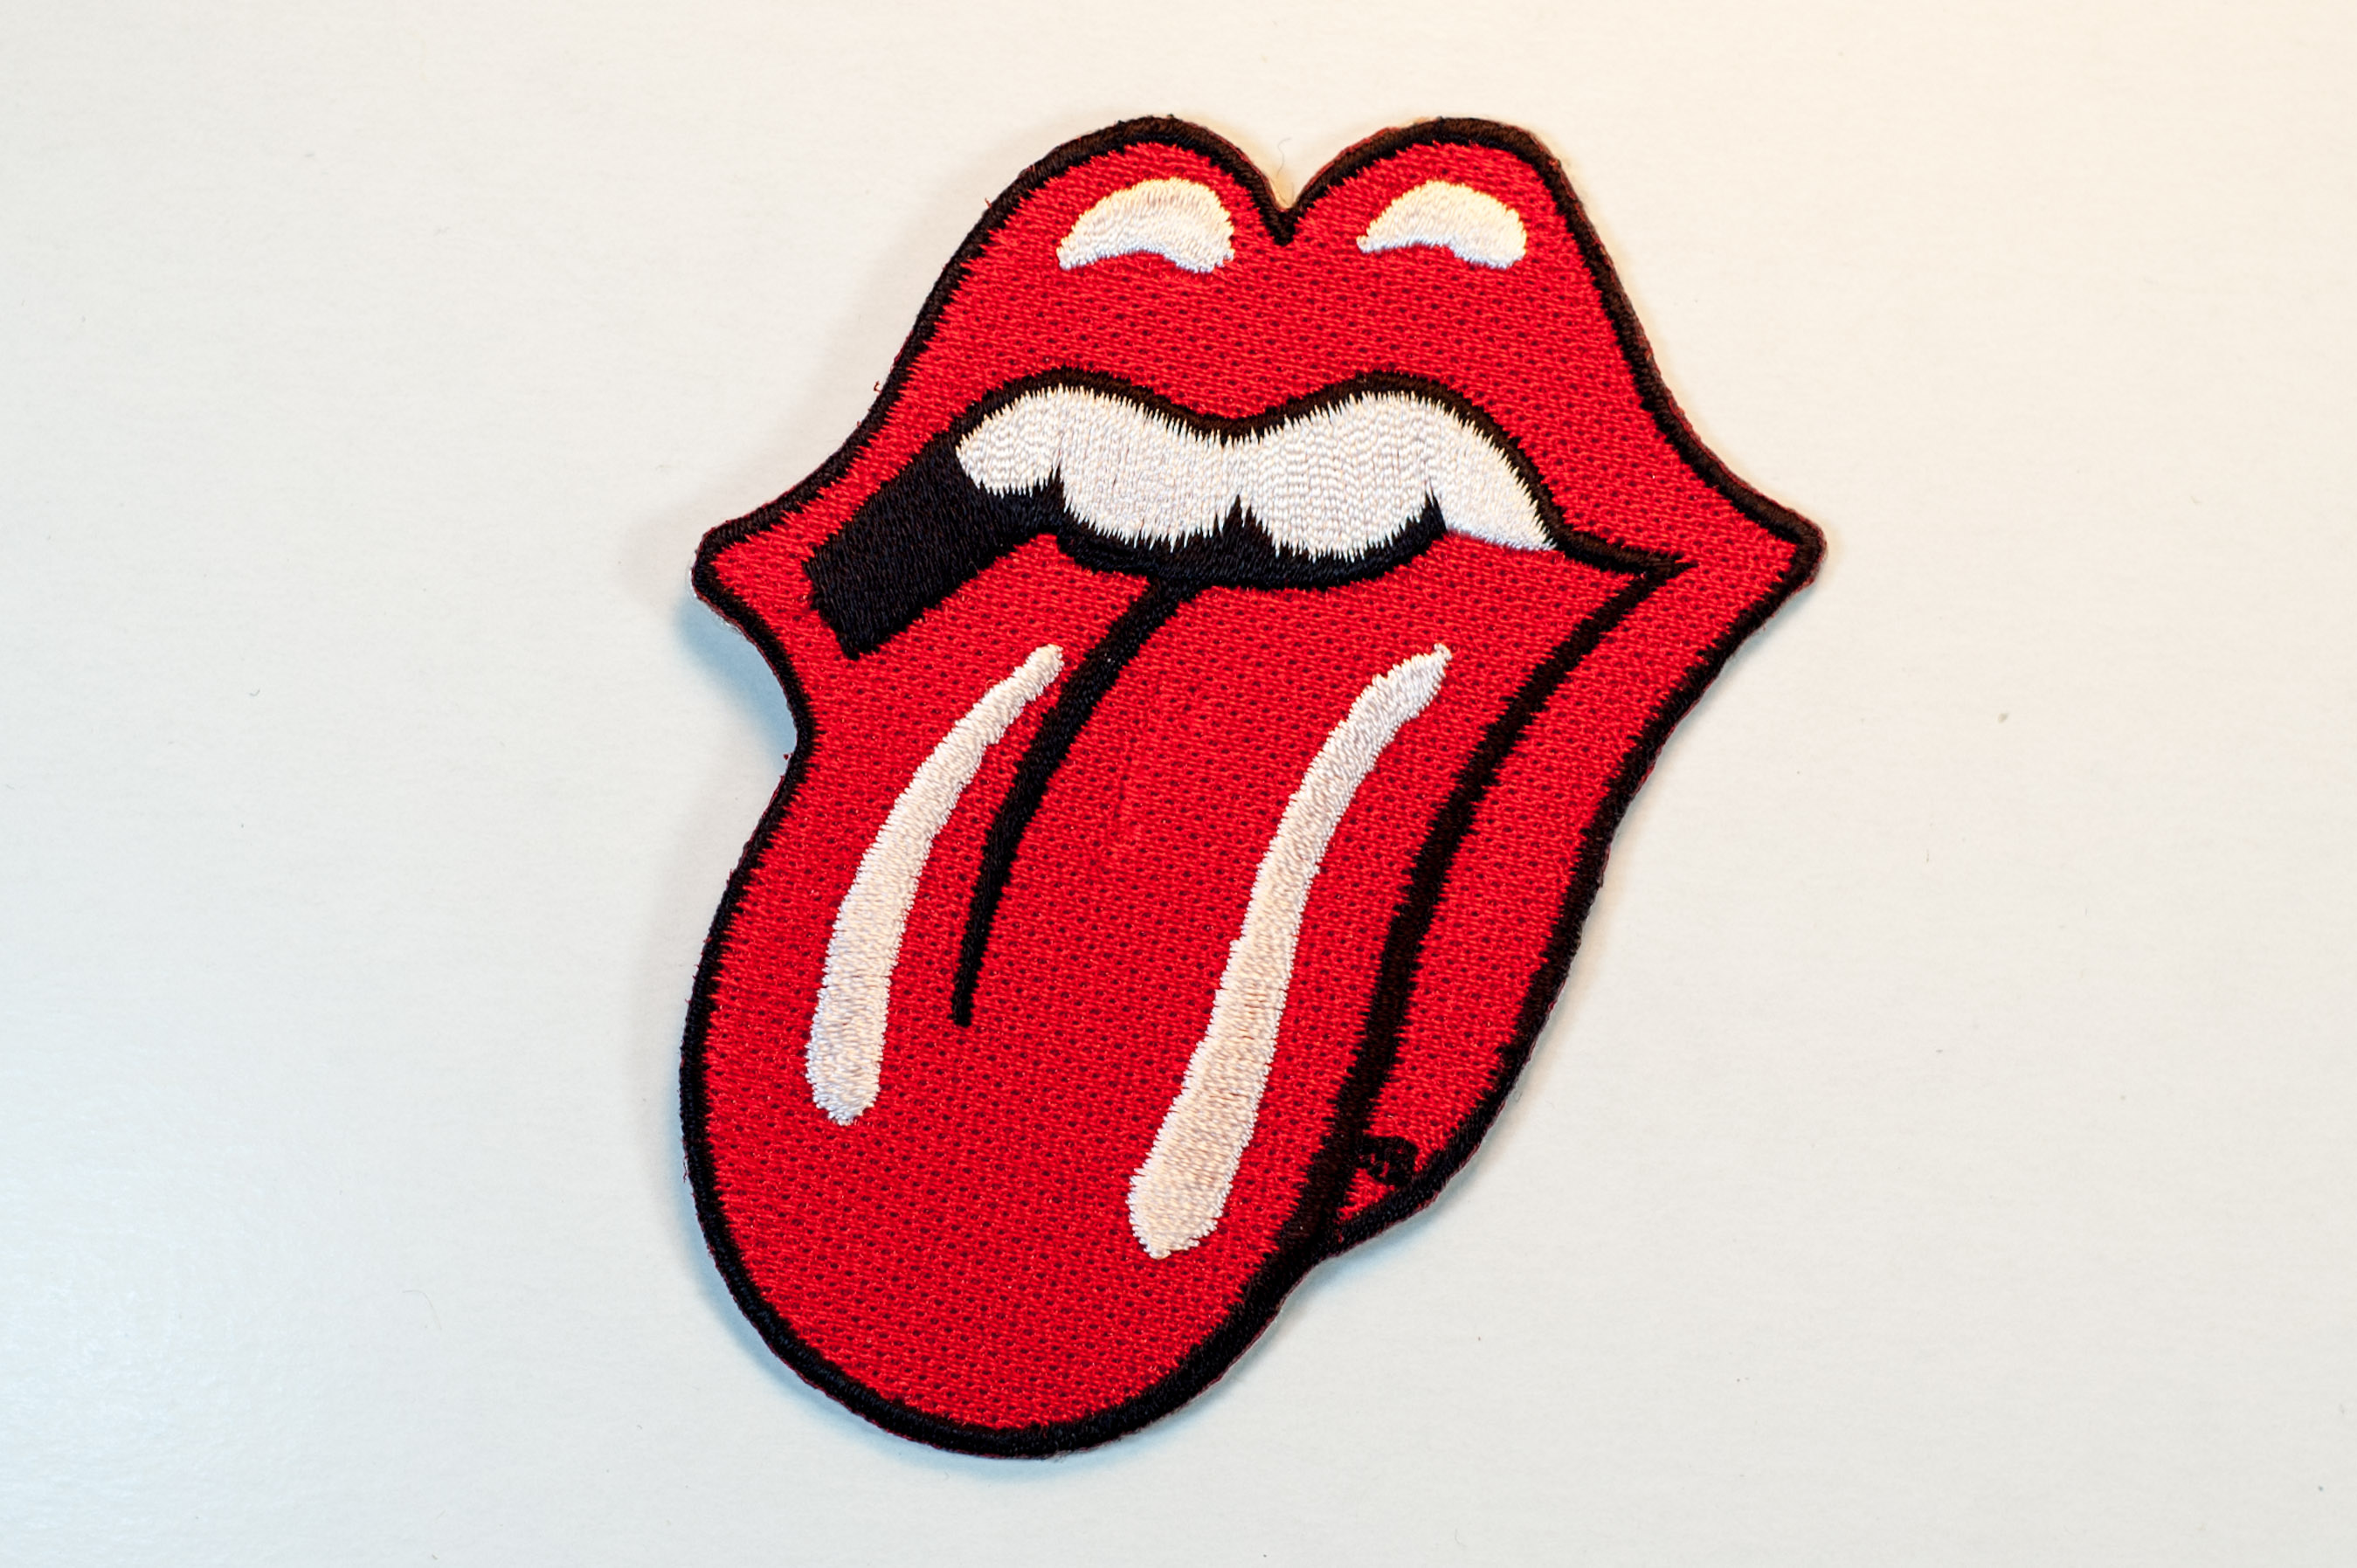 Rolling Stones Tongue | Getting Stitched